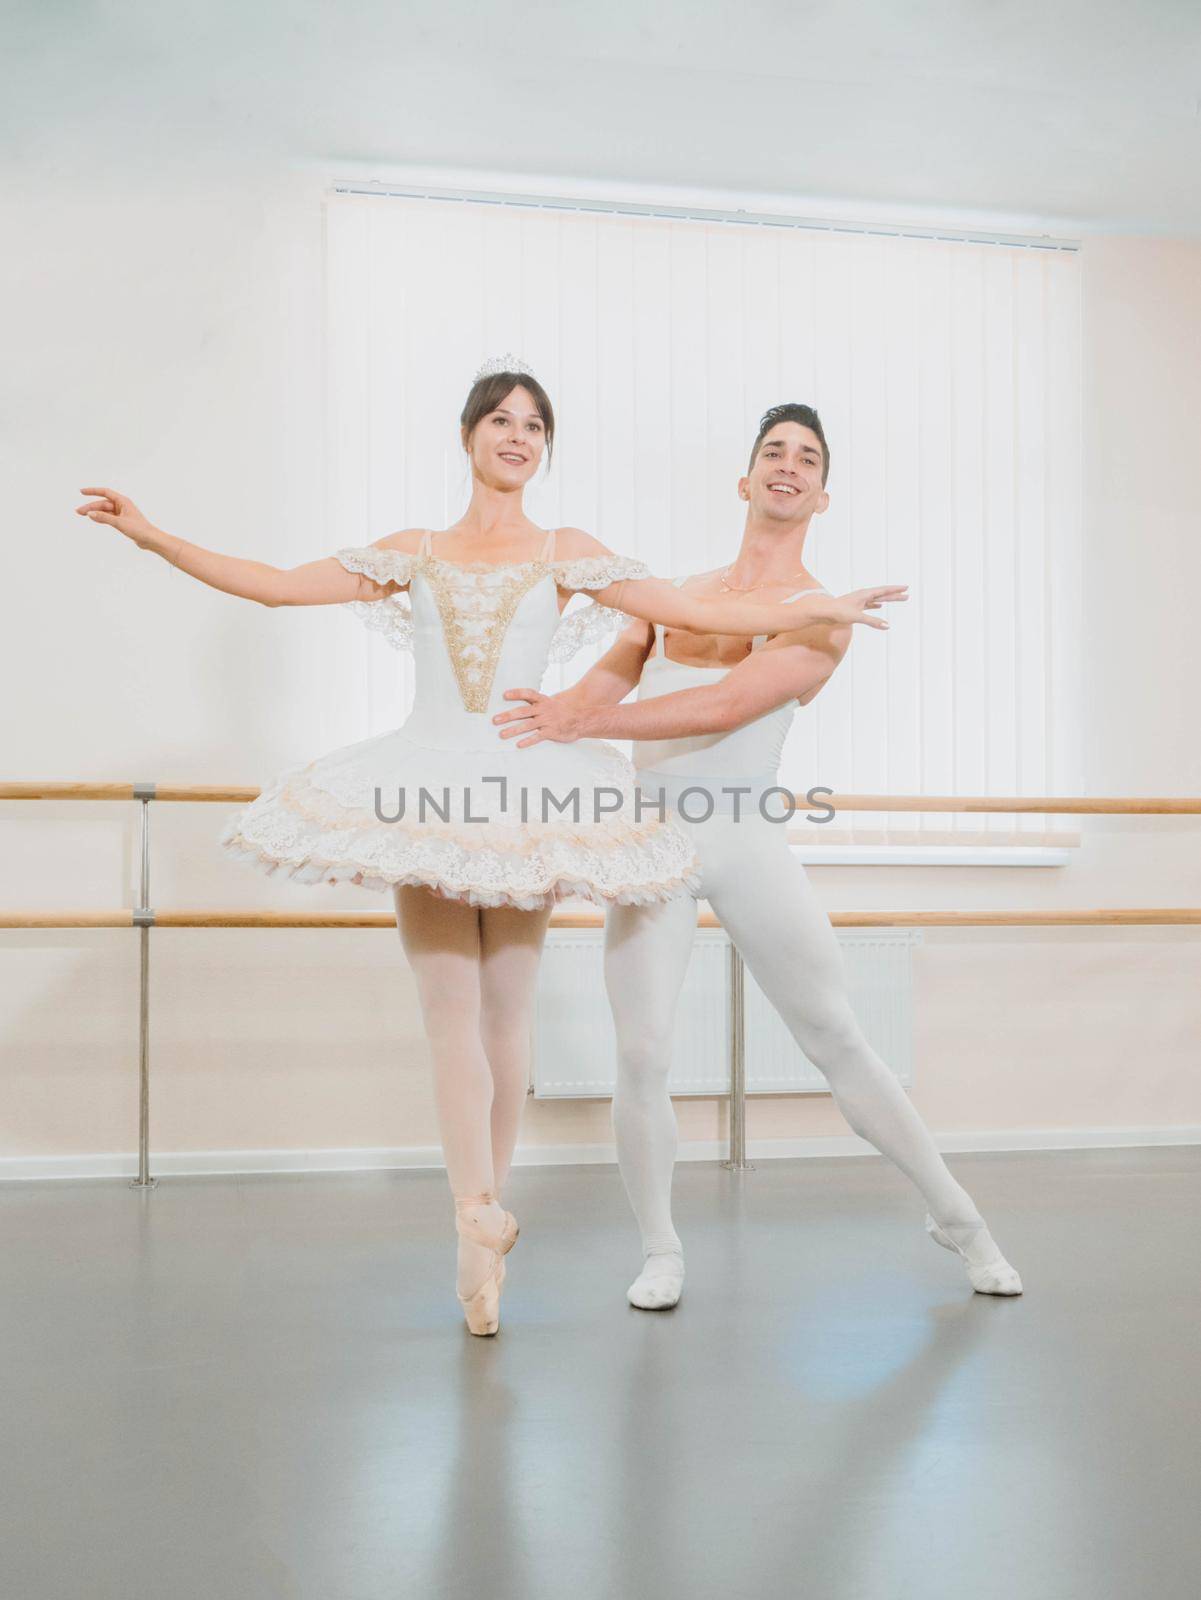 Rehearsal in the ballet hall or studio with minimalism interior. Young professional sensual couple in beautiful costumes dancing together.